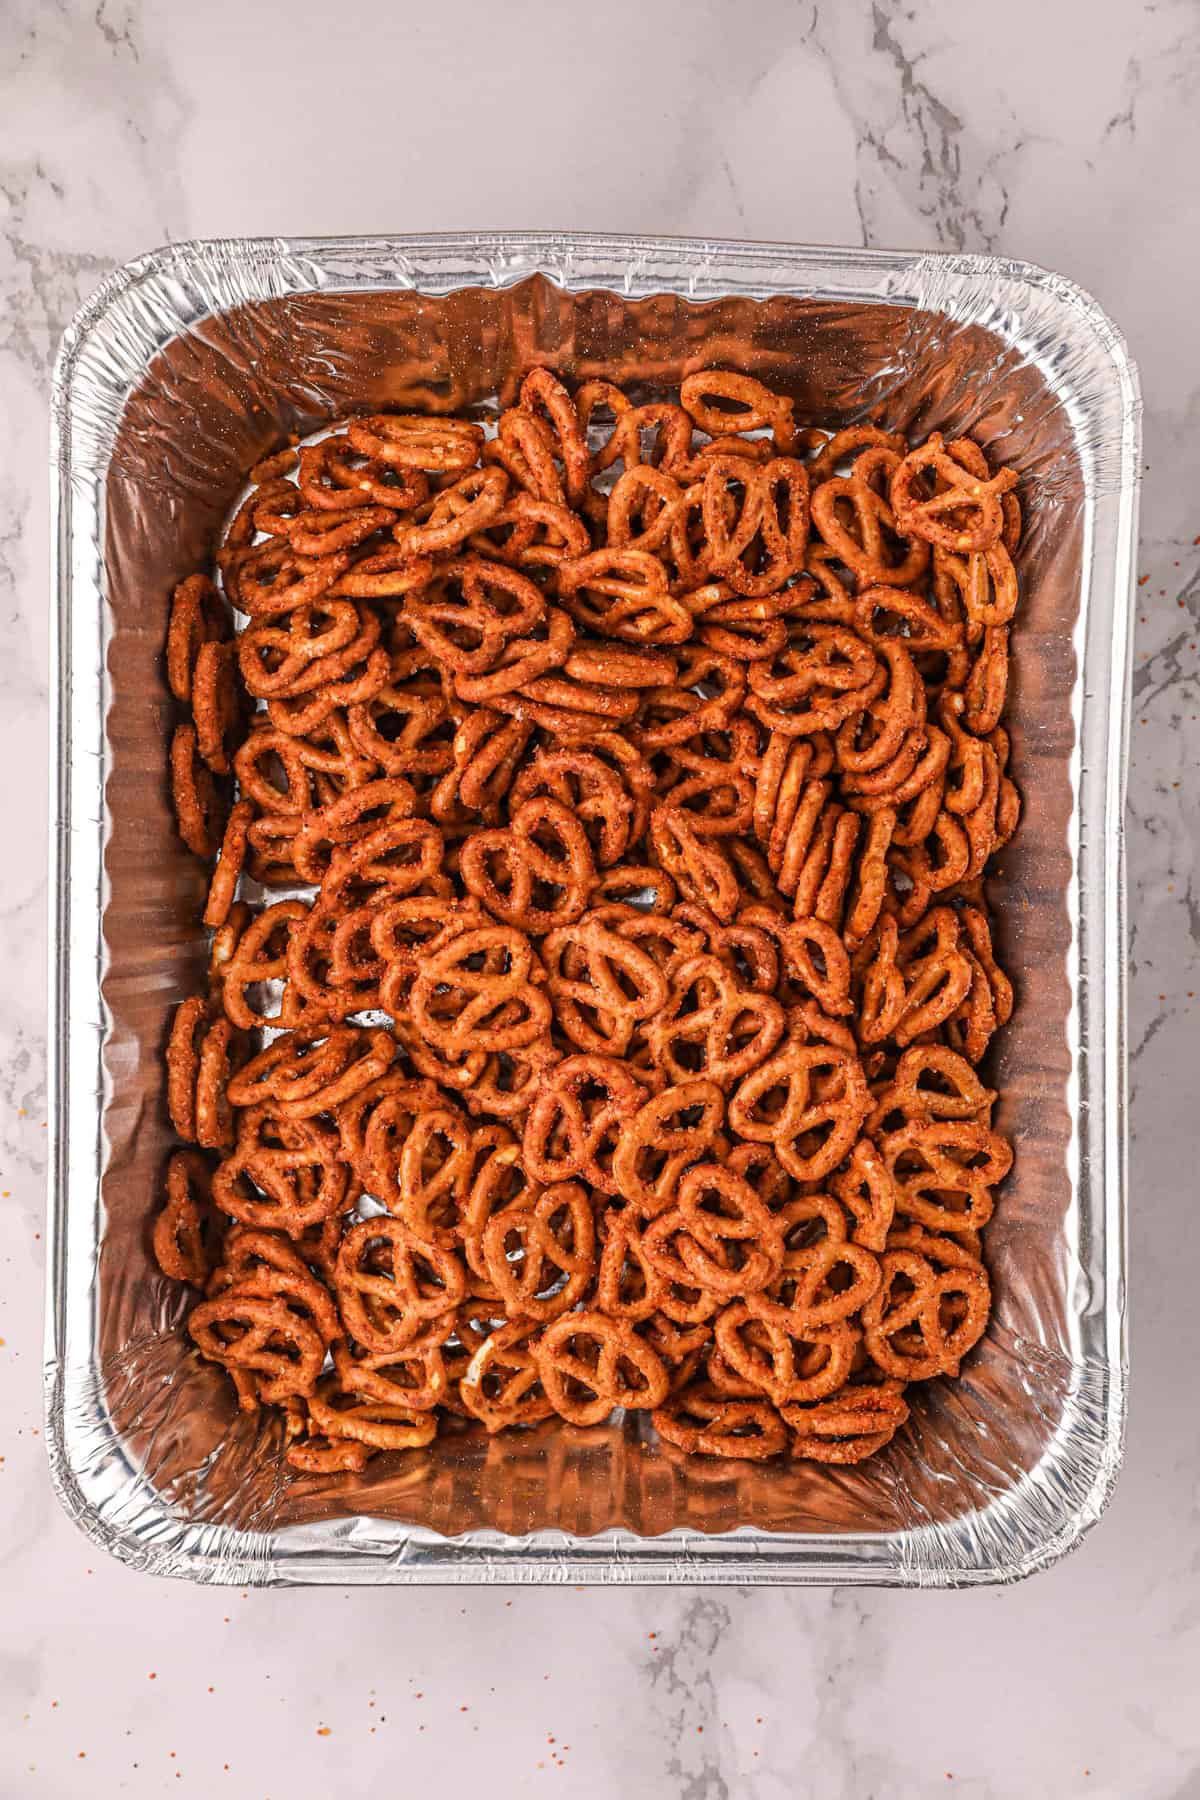 Pretzels Coated in Butter and Rub Ready for the Smoker for Traeger Smoked Pretzels